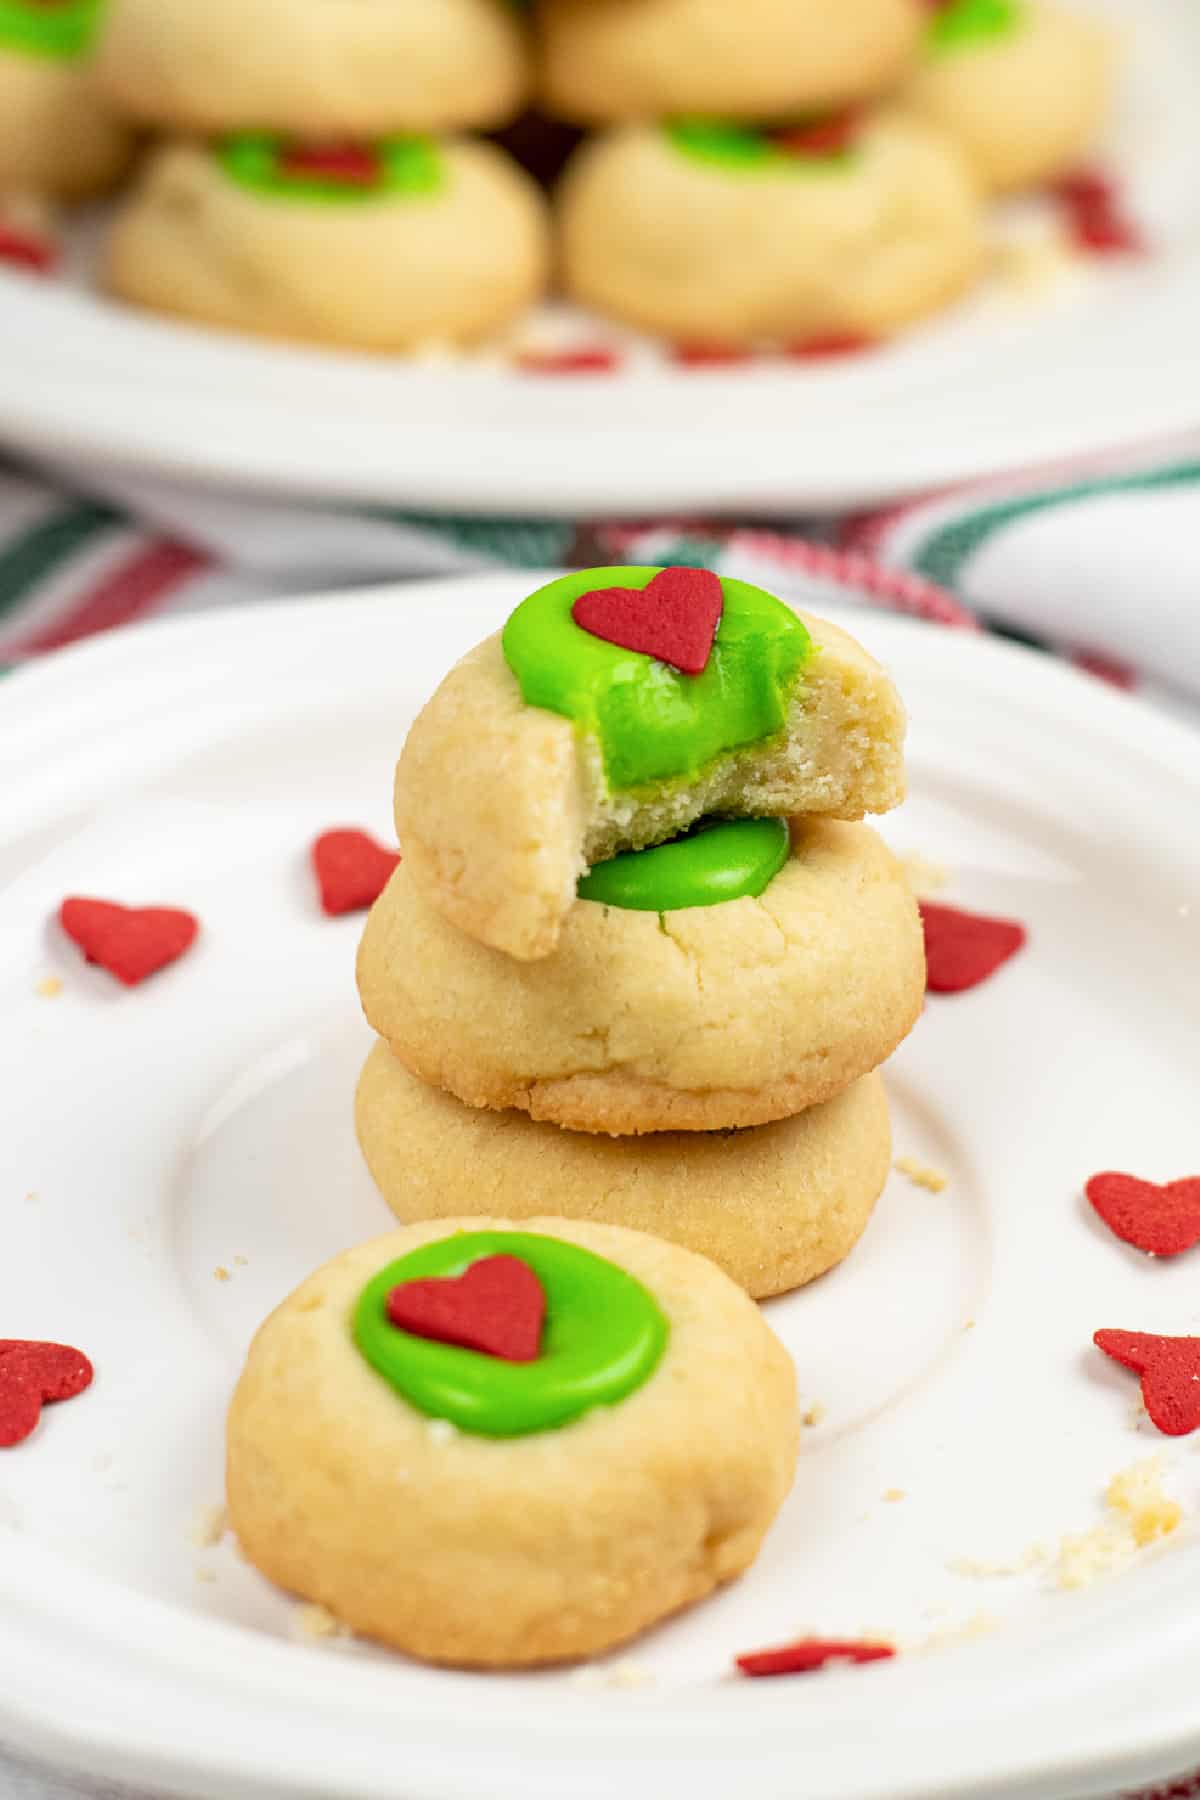 Four thumbprint cookies stacked on a plate with the top cookie missing a bite into the green thumbprint filling. A plate of more grinch thumbprint cookies sits behind on a plate on the counter.